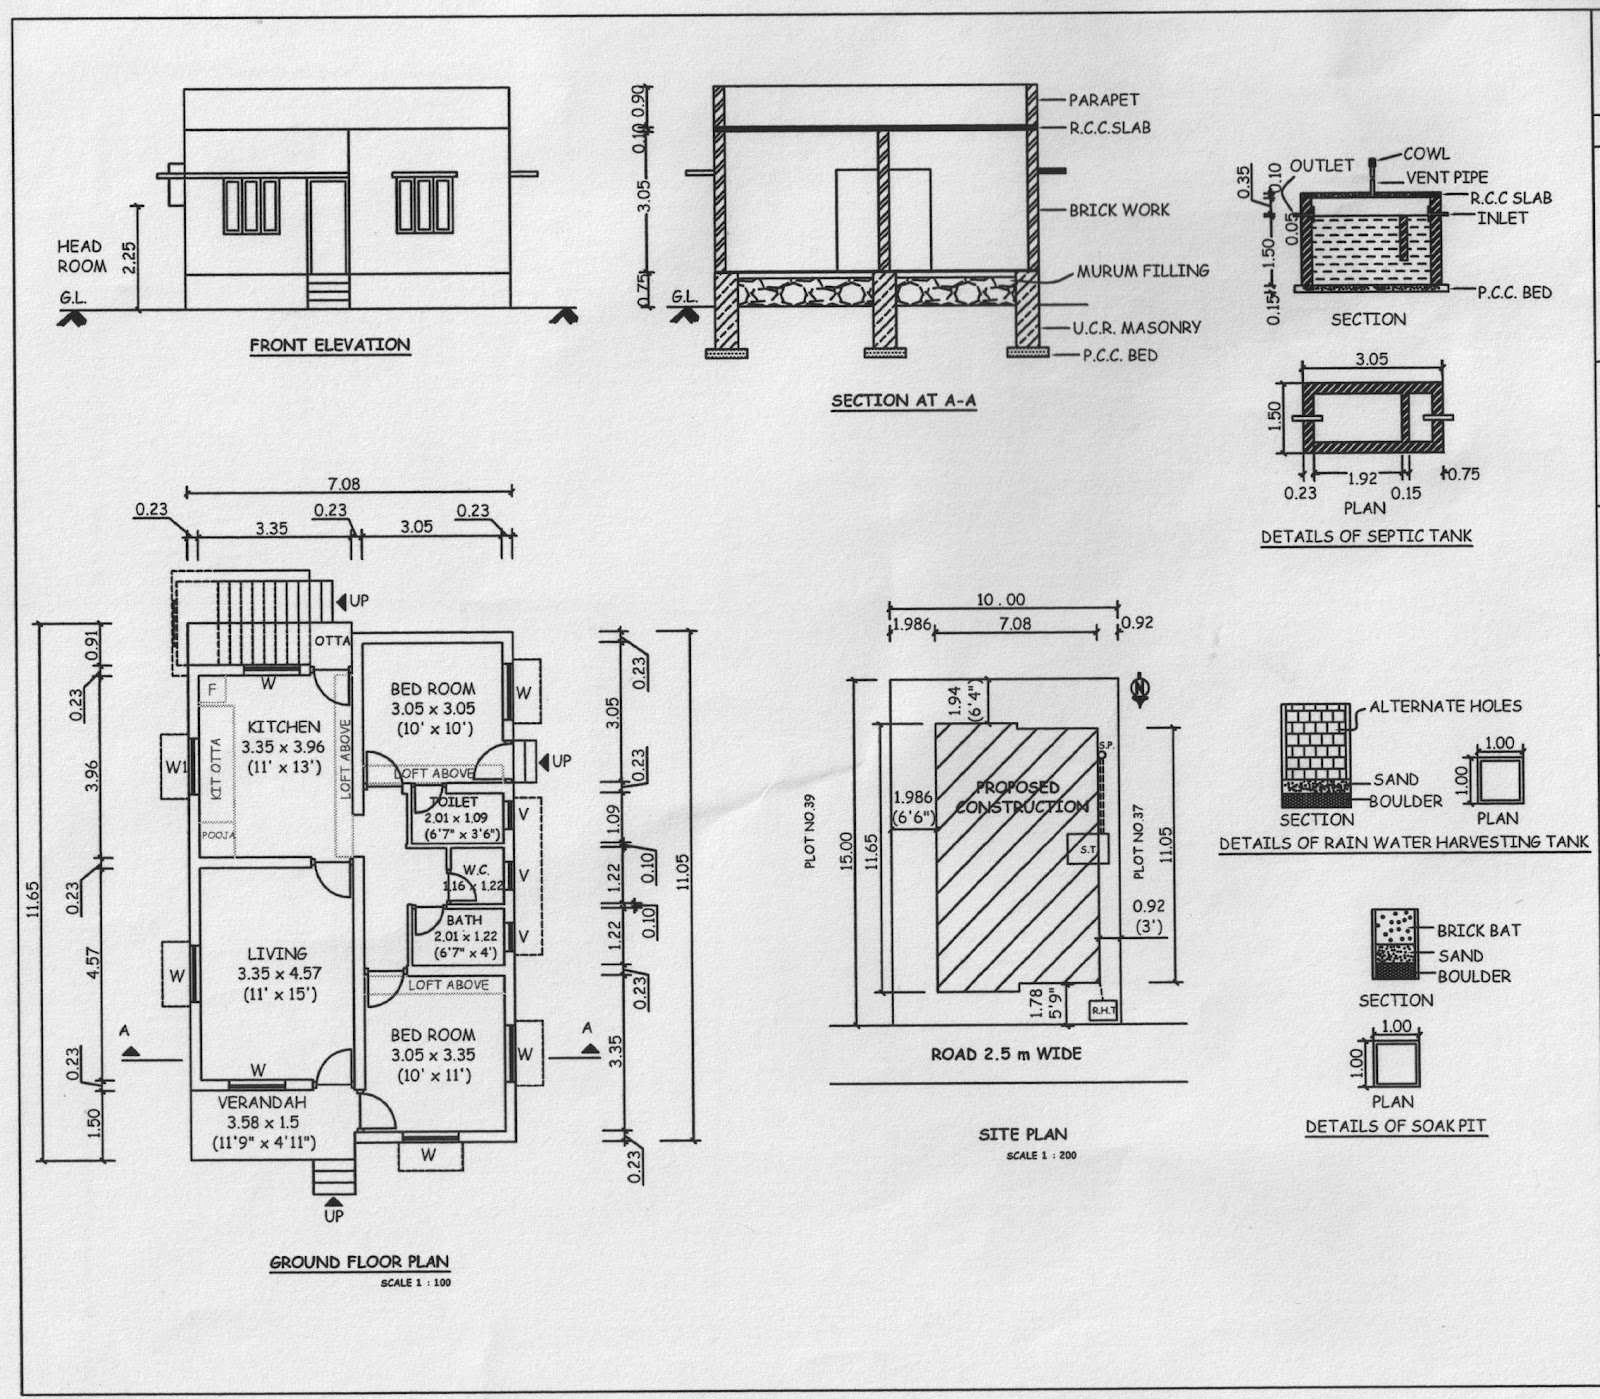 Building Design And Civil Engineering Drawing Aulaiestpdm Blog